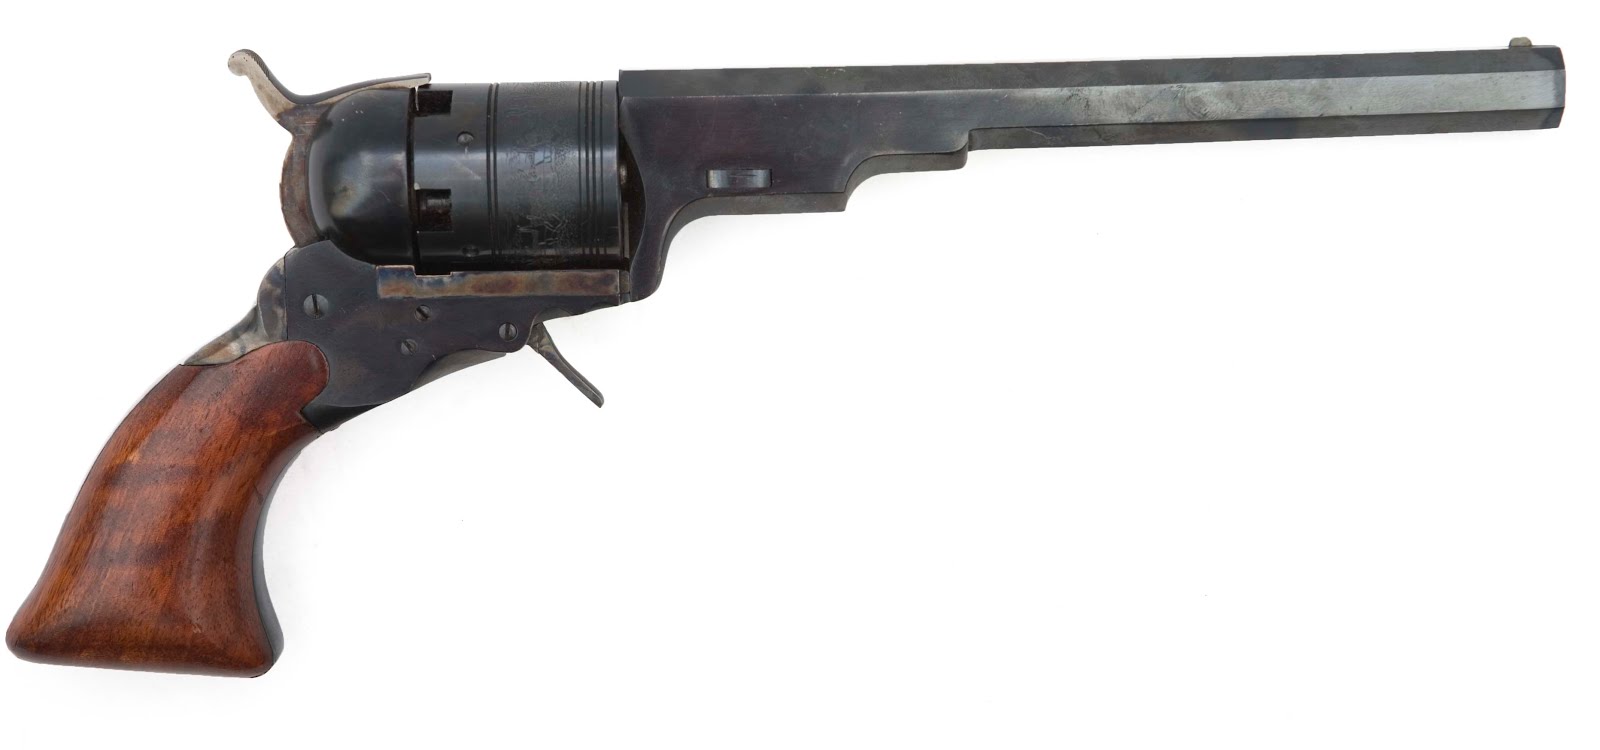 Colt Paterson Revolver. Very rare. Sold at auction for $977,500 ~